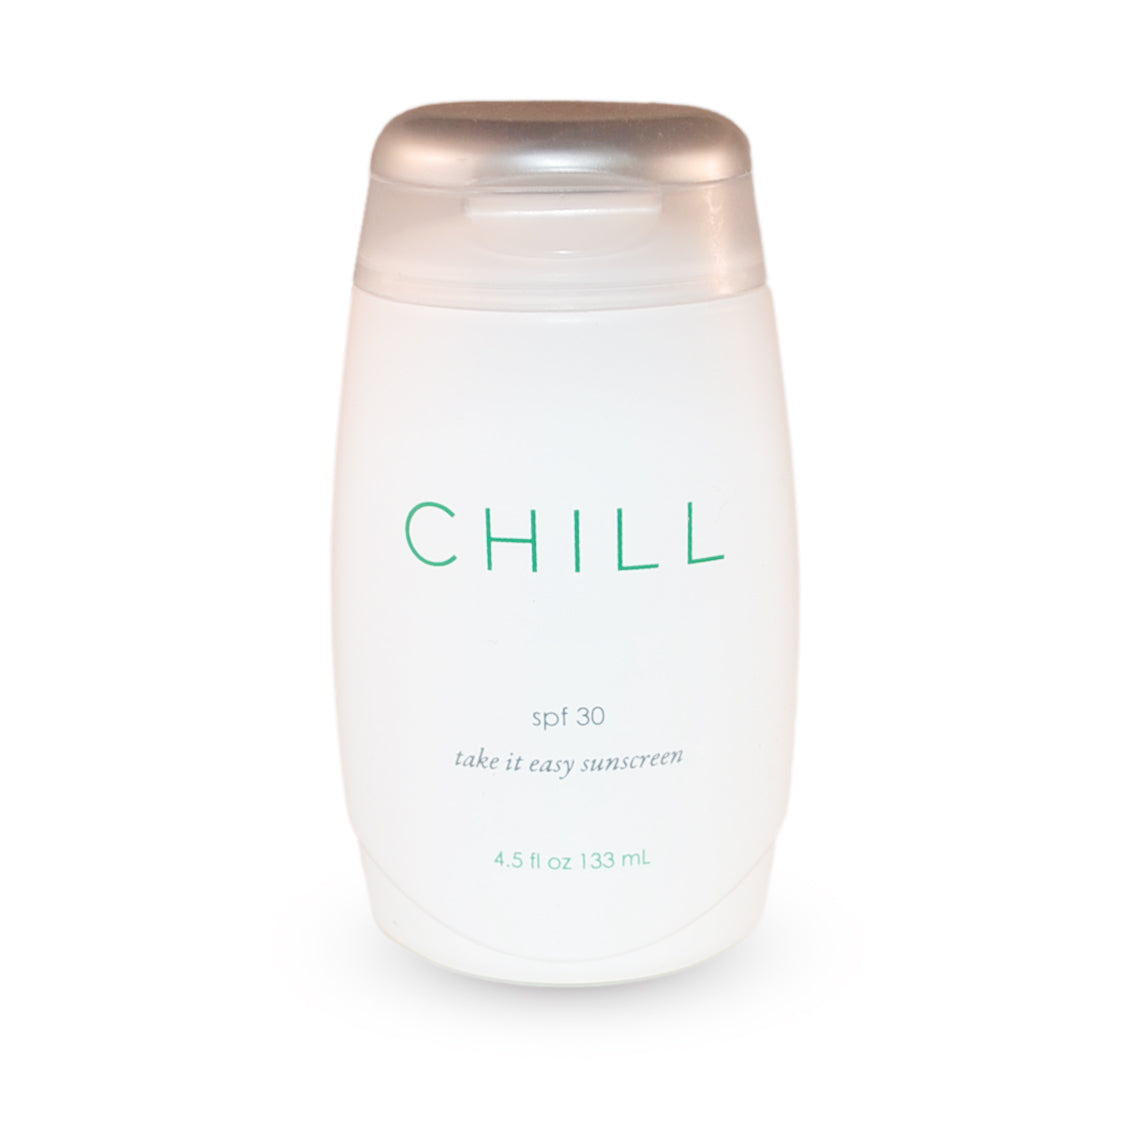 "Chill" Take it Easy Sunscreen